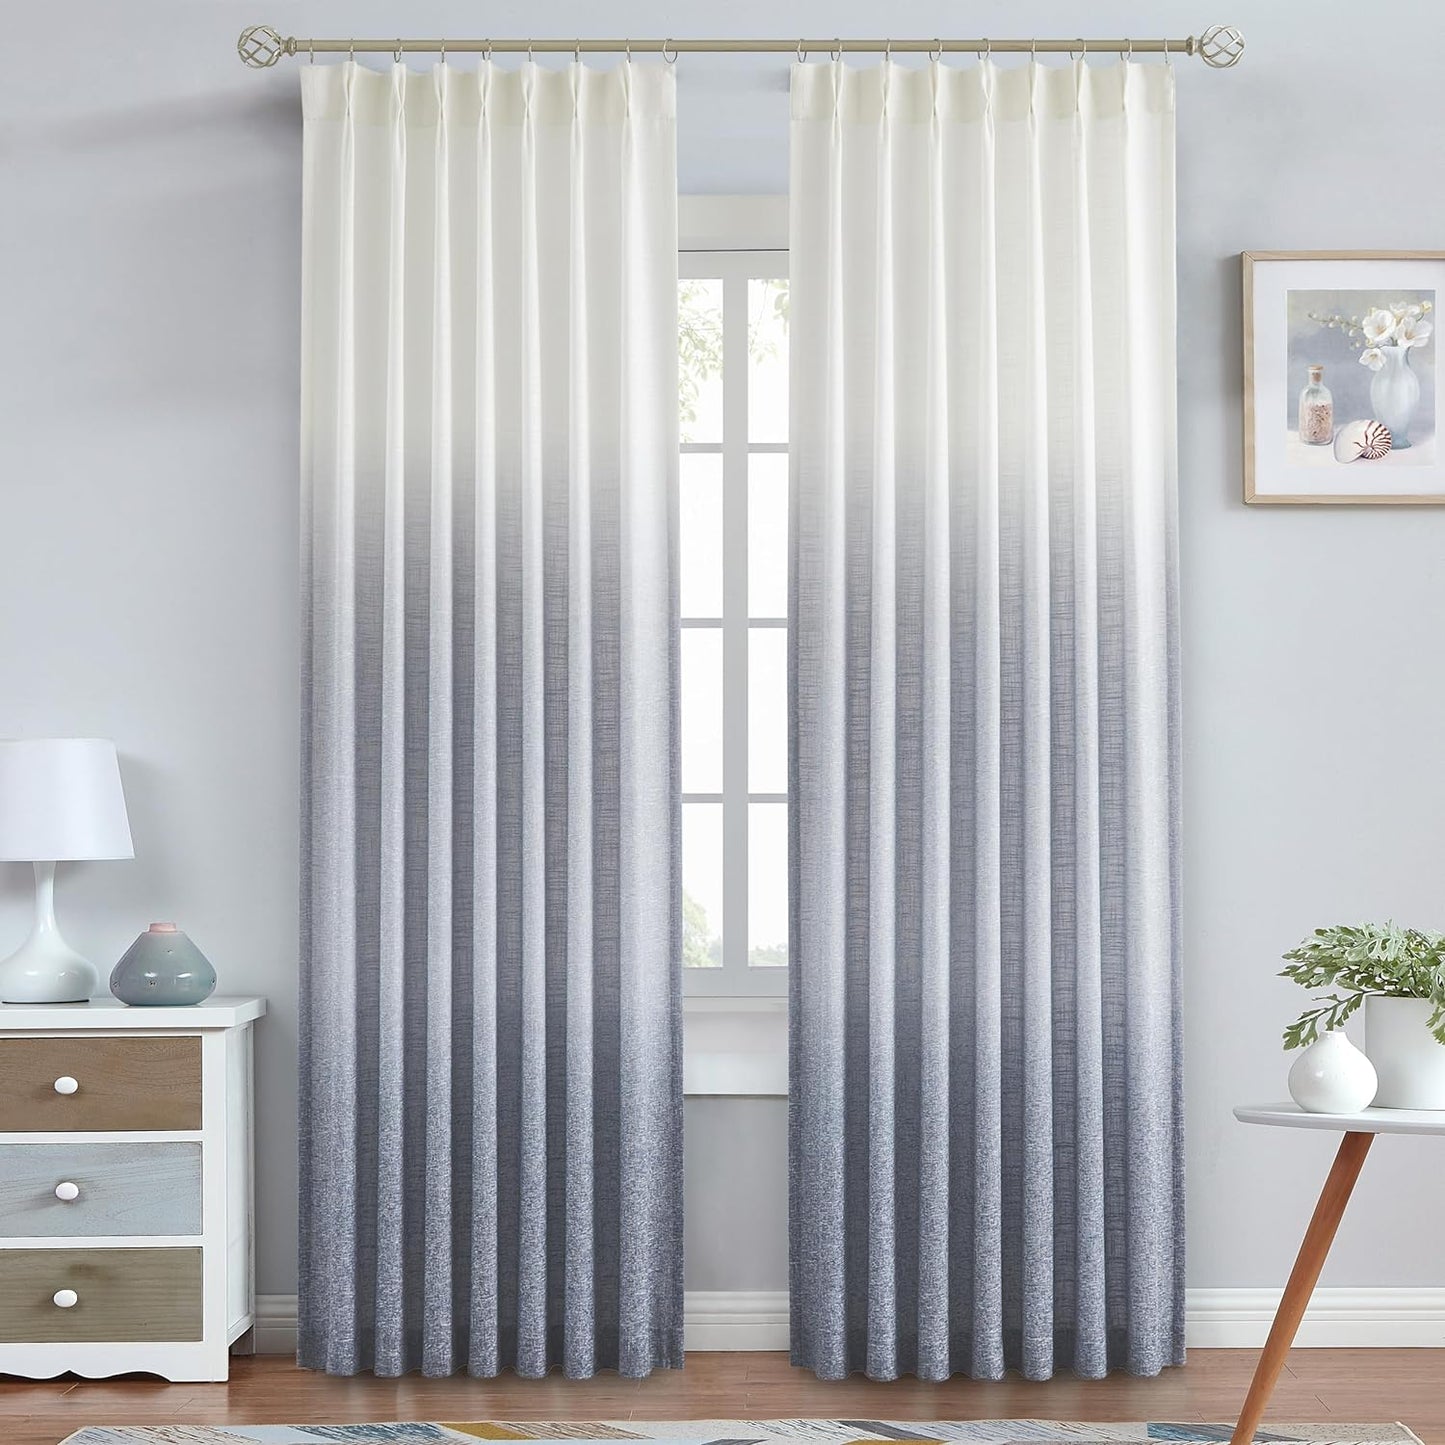 Central Park Ombre Pinch Pleat Curtain Panels Rayon Blend Textured Semi Sheer Window Treatment Drape with Backtab for Living Room Bedroom, Cream White to Indigo Blue, 40" Wx84 L, 2 Panels  Central Park Indigo Blue 40"X95"X2 